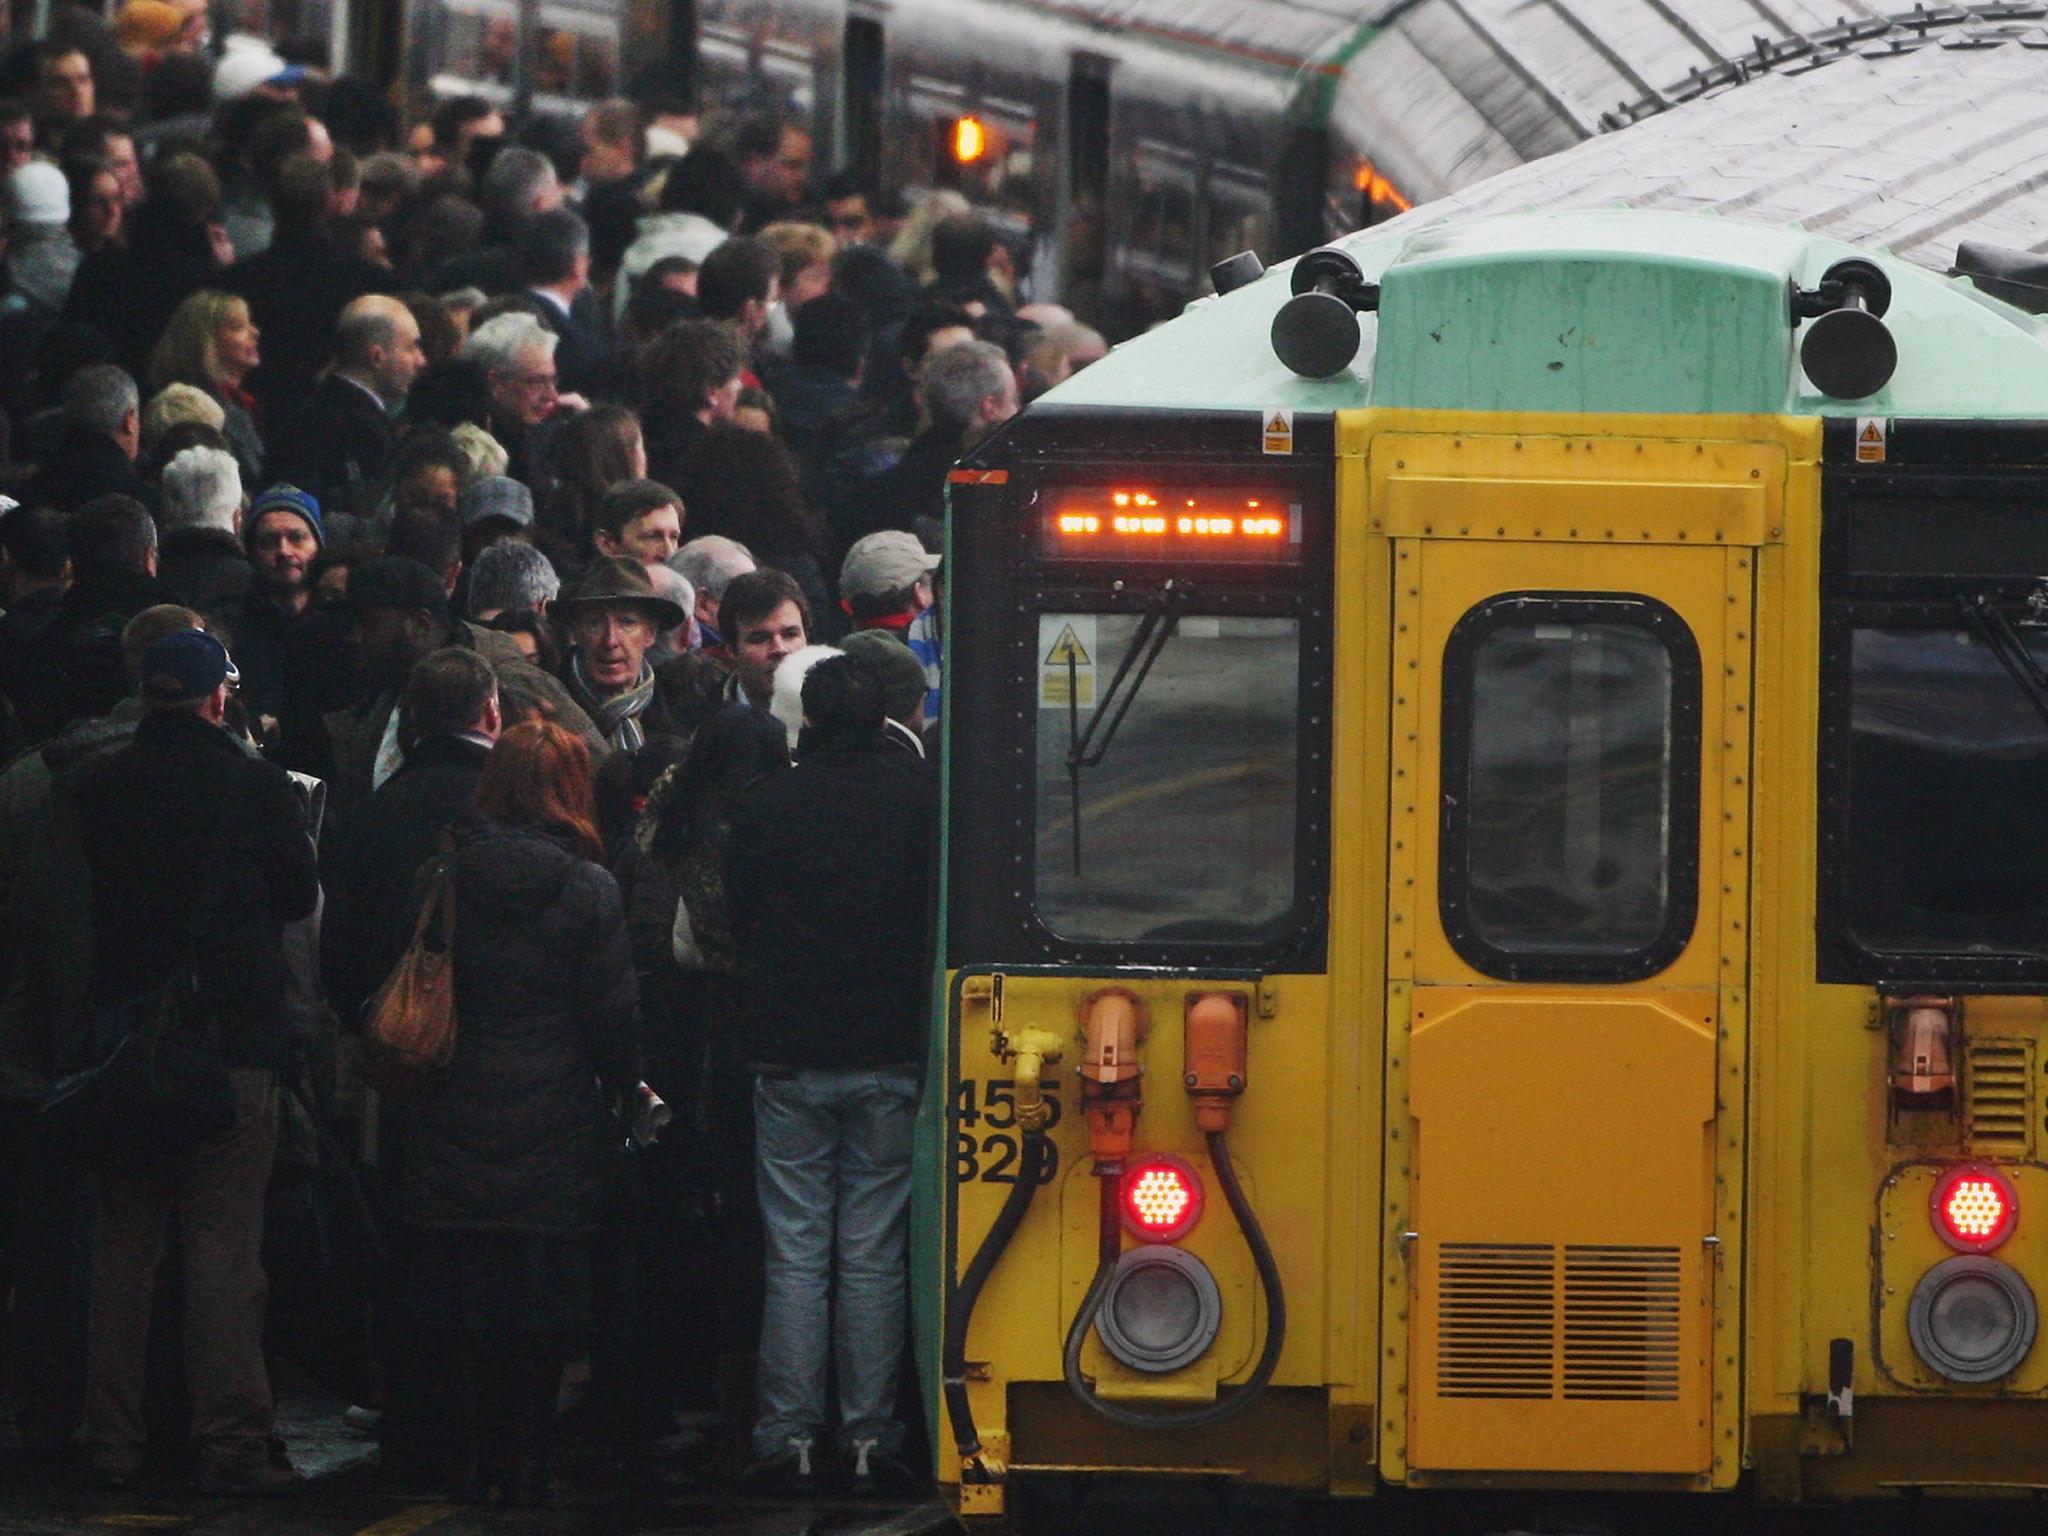 Abellio Greater Anglia said they are increasing the capacity on the service